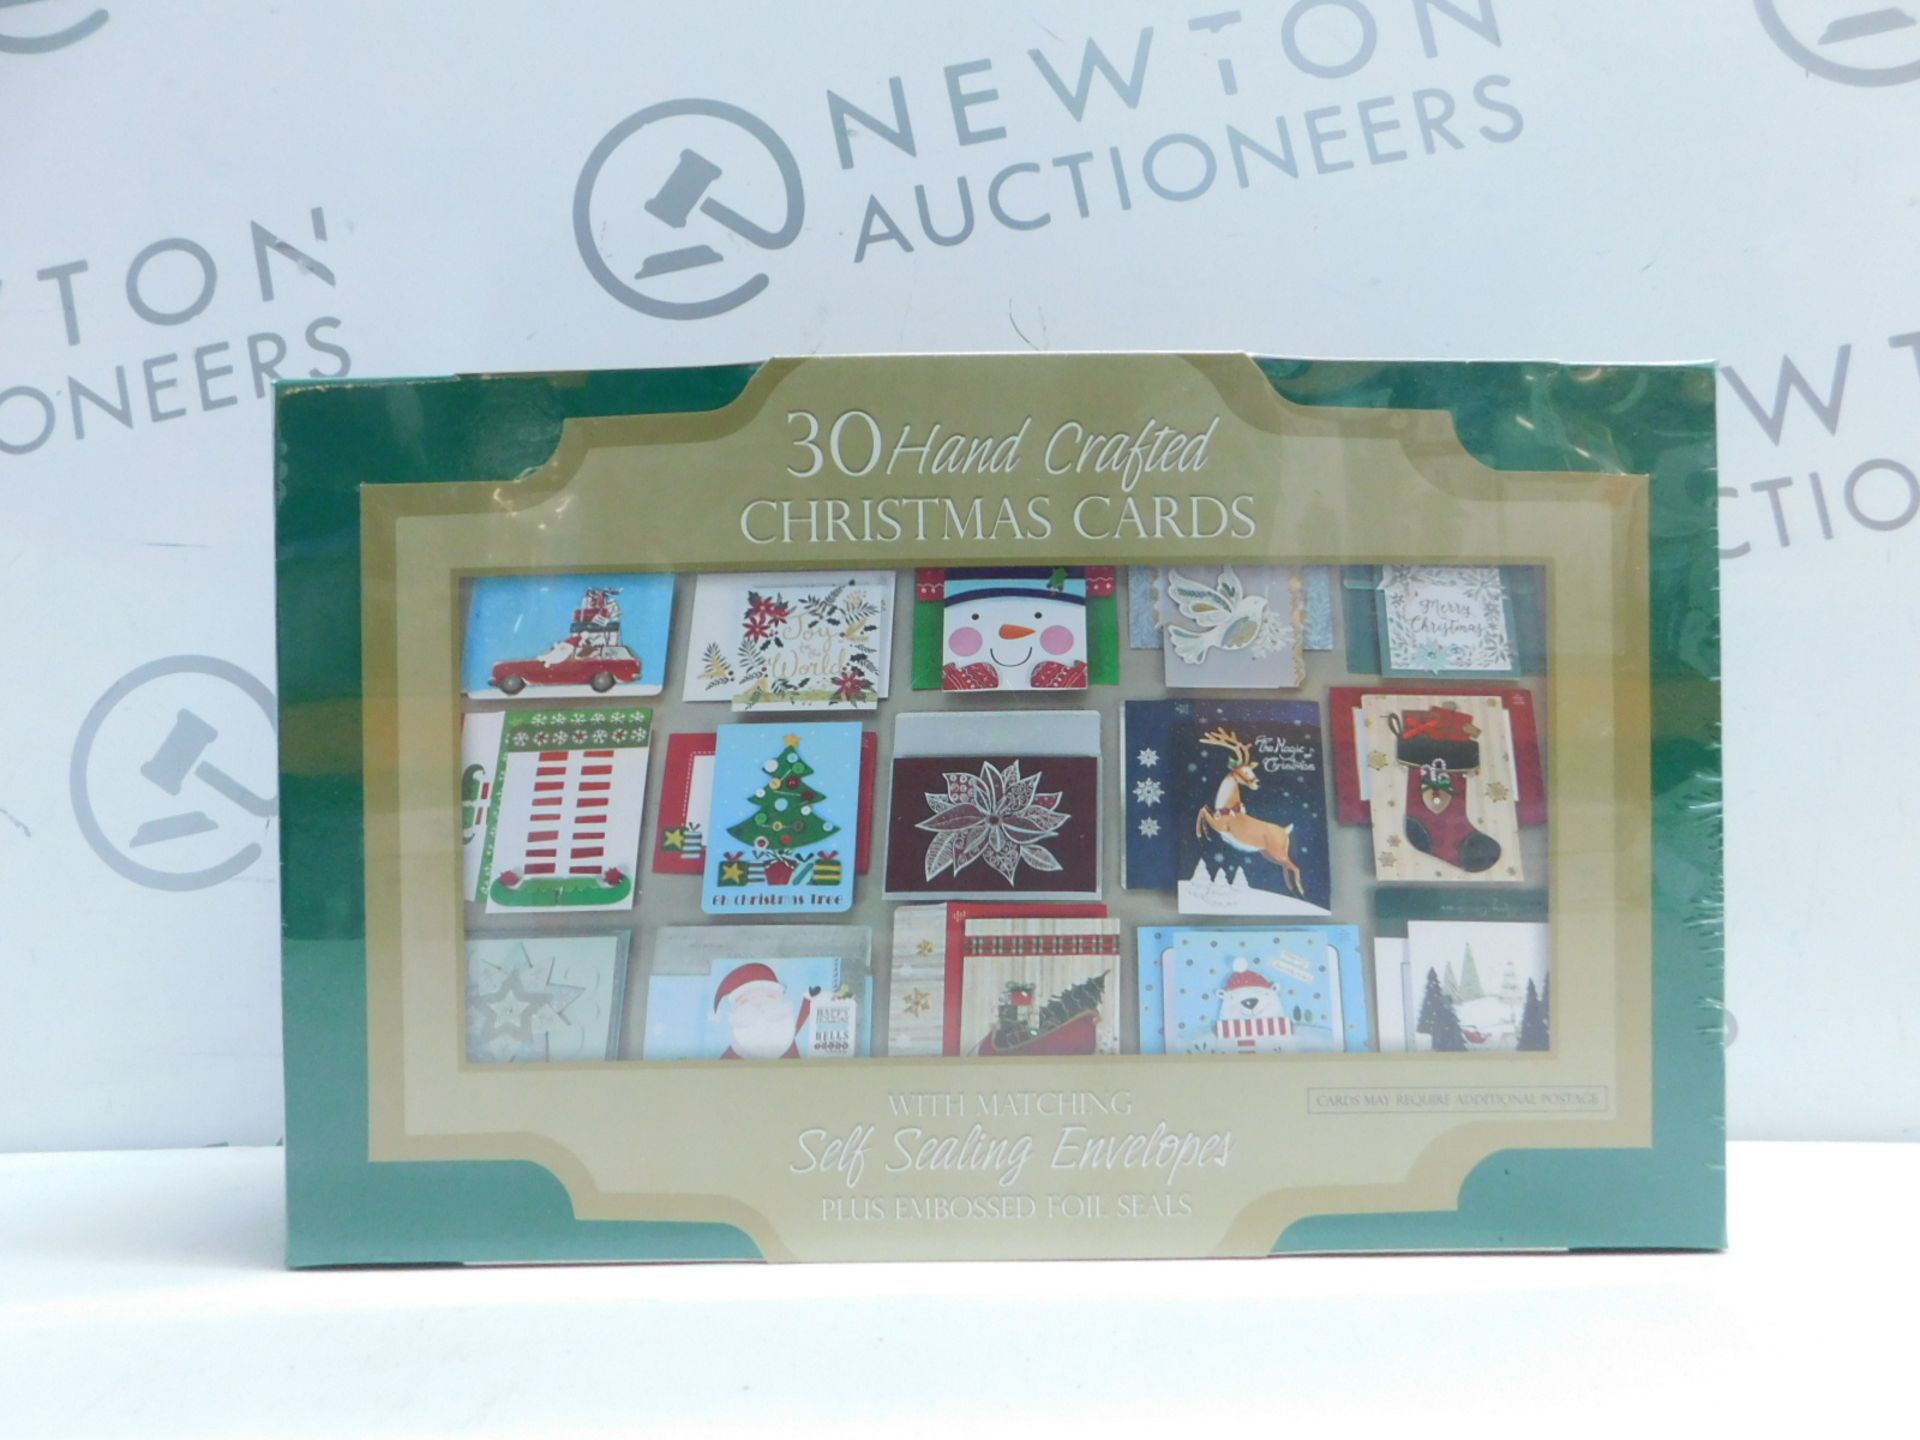 1 BRAND NEW SEALED BOX OF HALLMARK 40 CHRISTMAS CARDS WITH MATCHING SELF- SEALING ENVELOPES RRP Â£